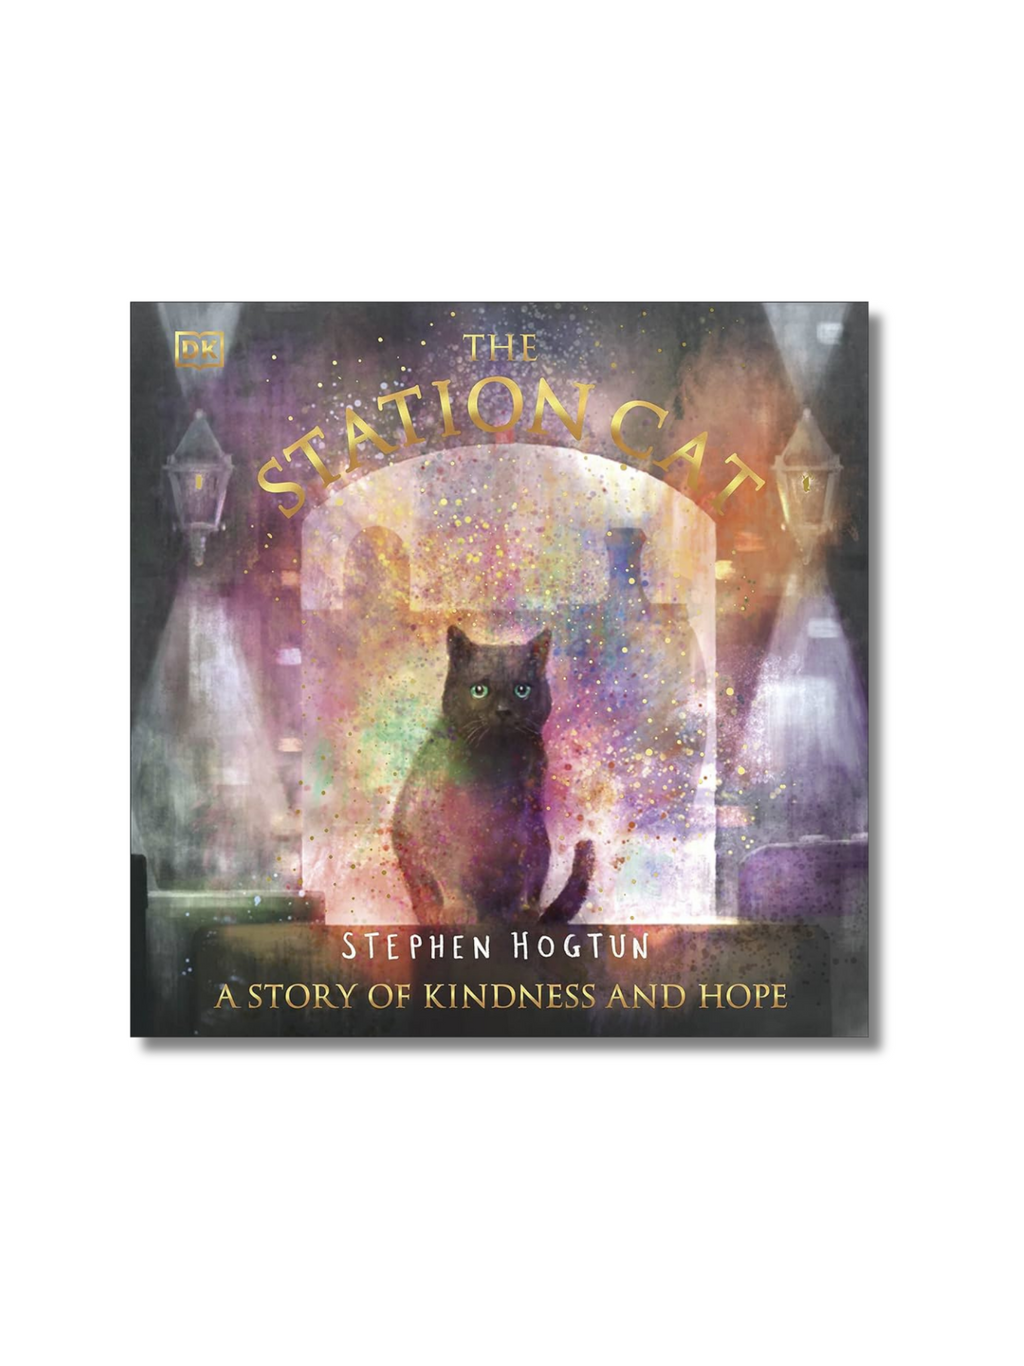 The Station Cat: A Story of Kindness and Hope